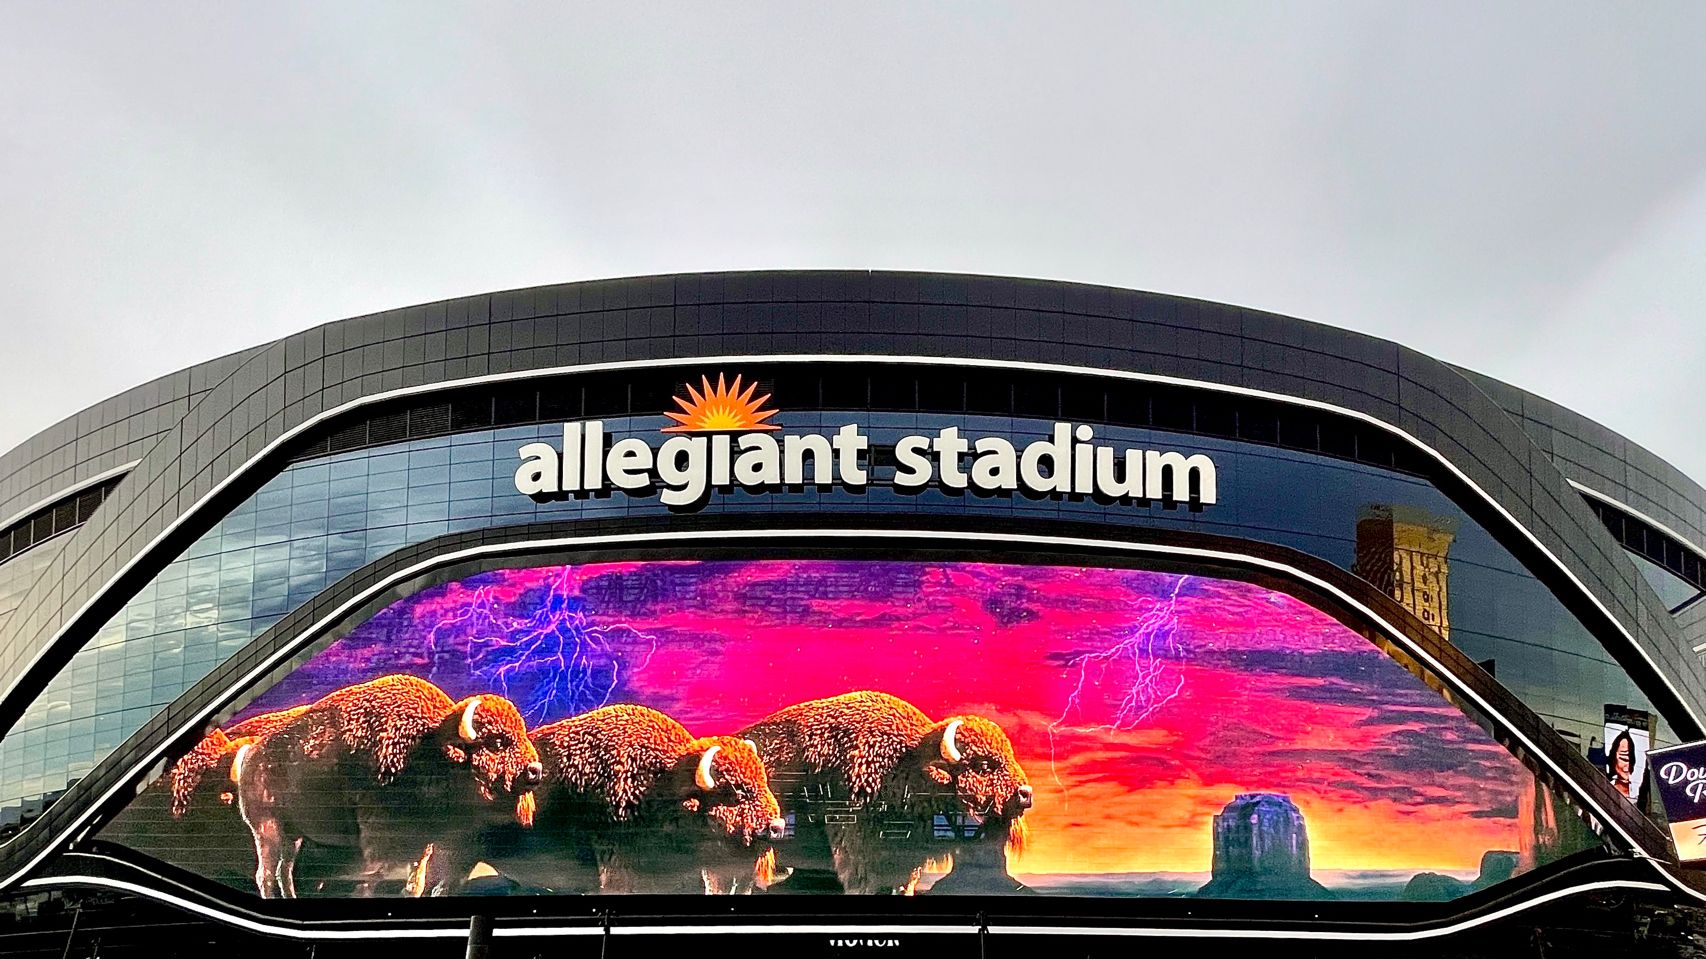 Allegiant Stadium includes a sports betting lounge when it opens